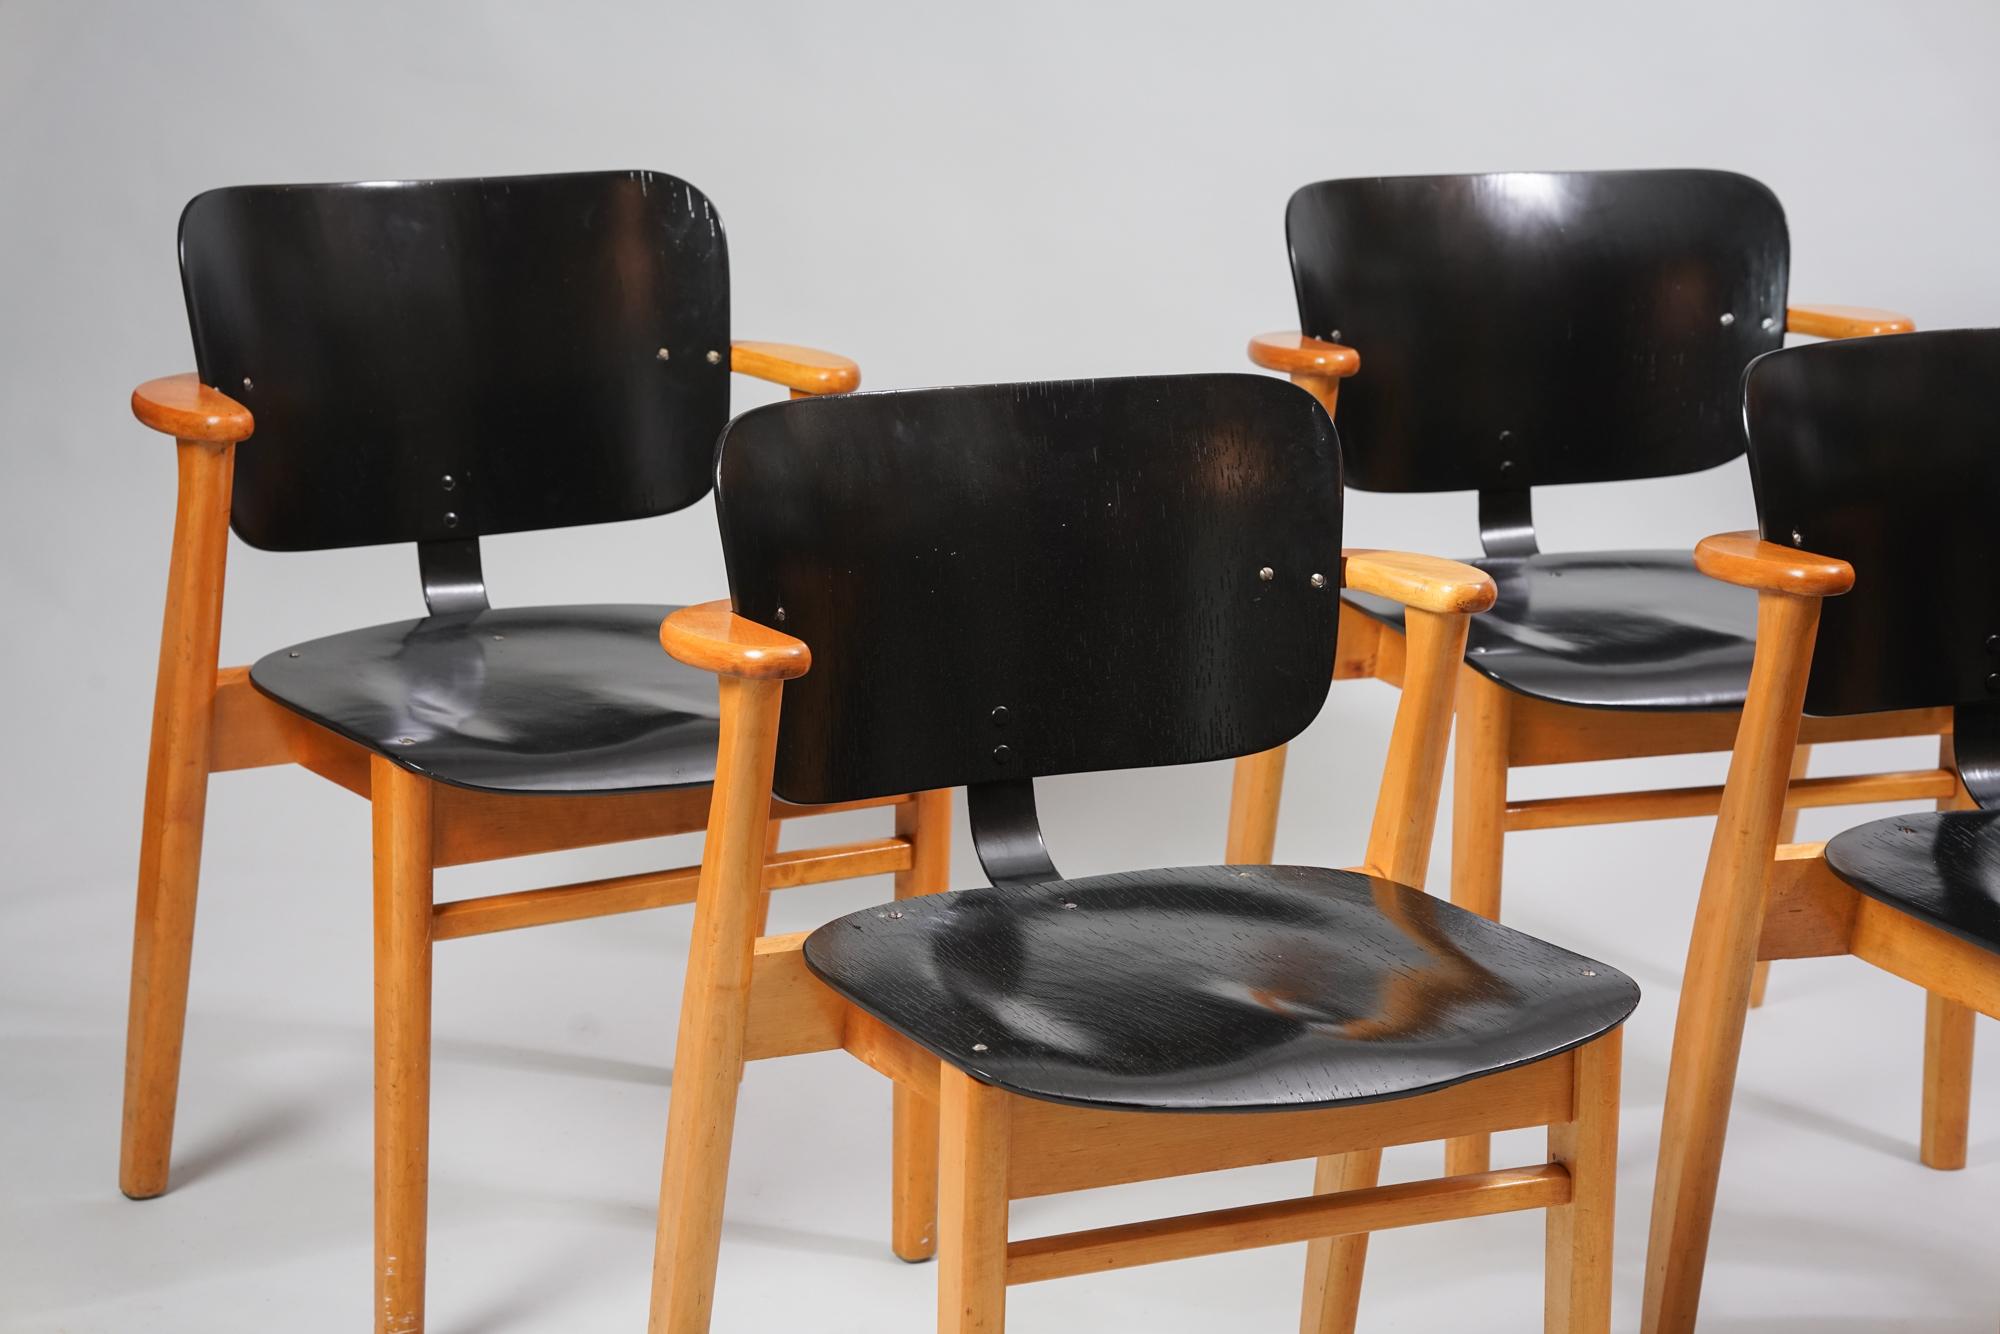 Set of four model Domus chairs by Ilmari Tapiovaara from the 1950s. Birch and birch plywood. The seats have been repainted. Good vintage condition, minor patina and wear consistent with age and use. The chairs are sold as a set. Classic Ilmari